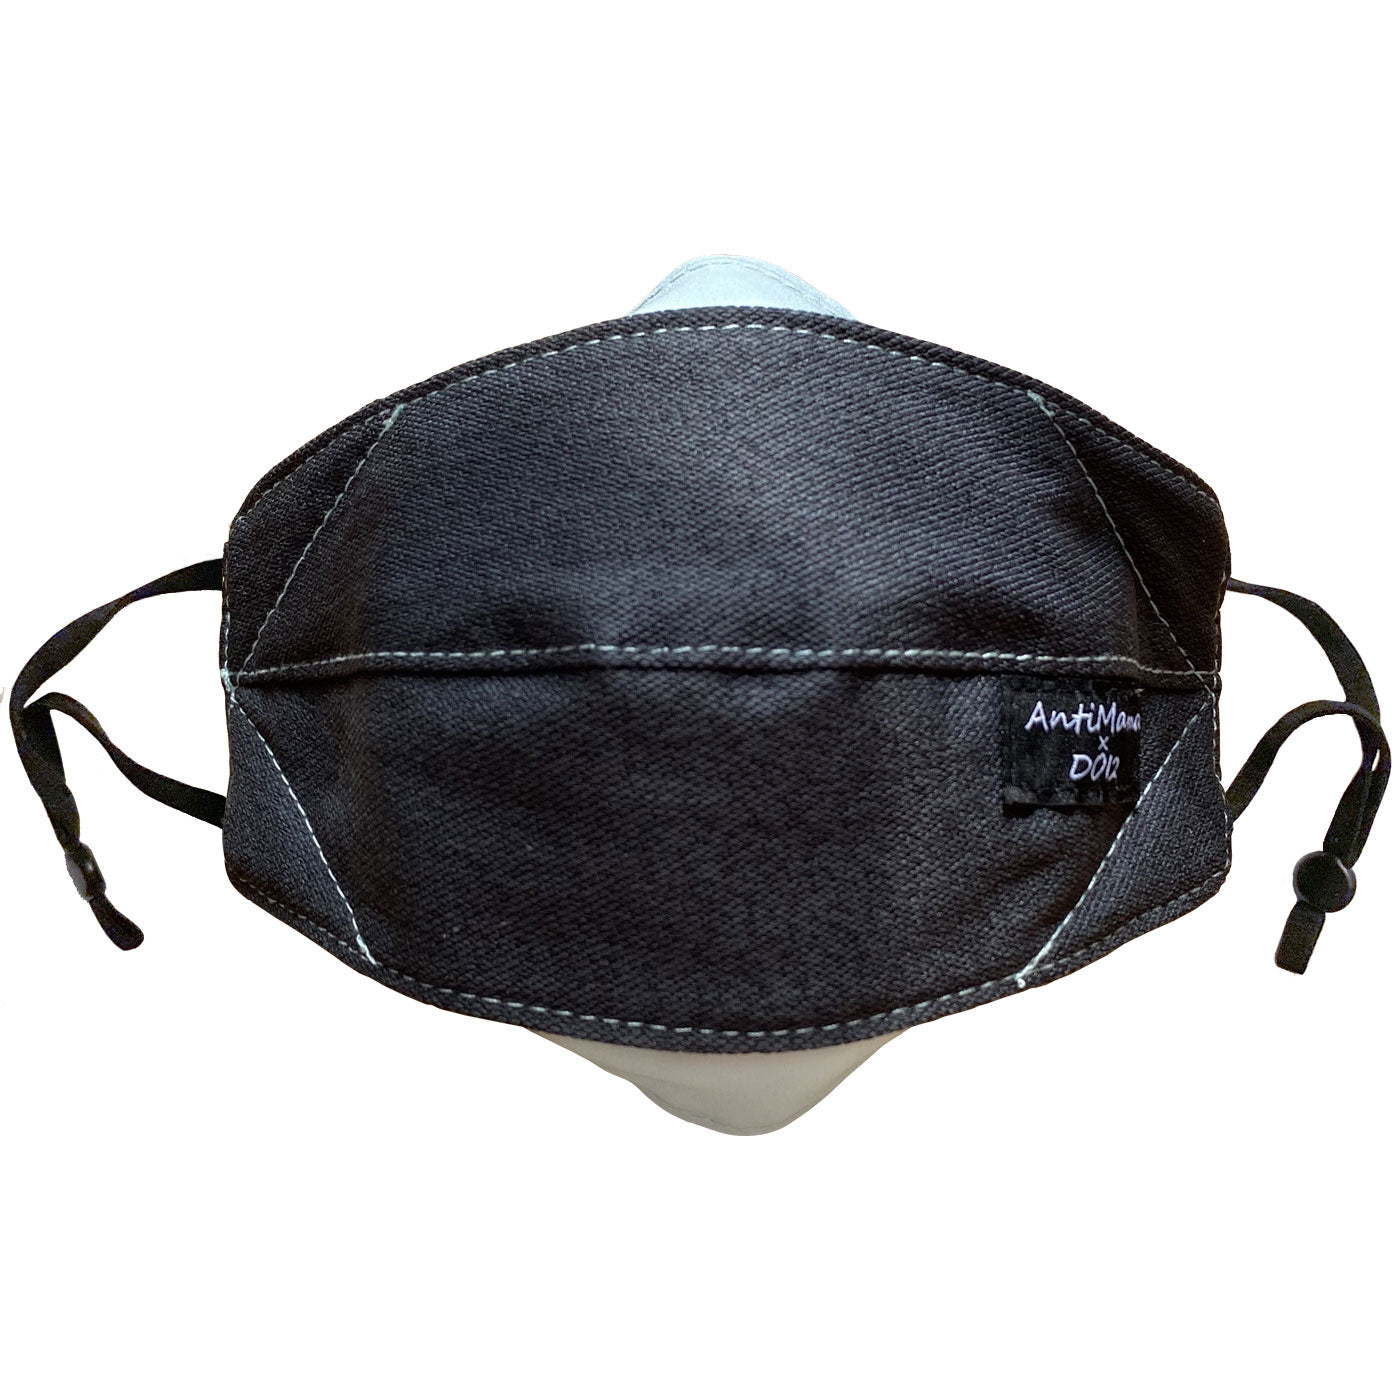 Origami Style Reusable Polyester Cloth Face Mask (Charcoal / Light Mint)